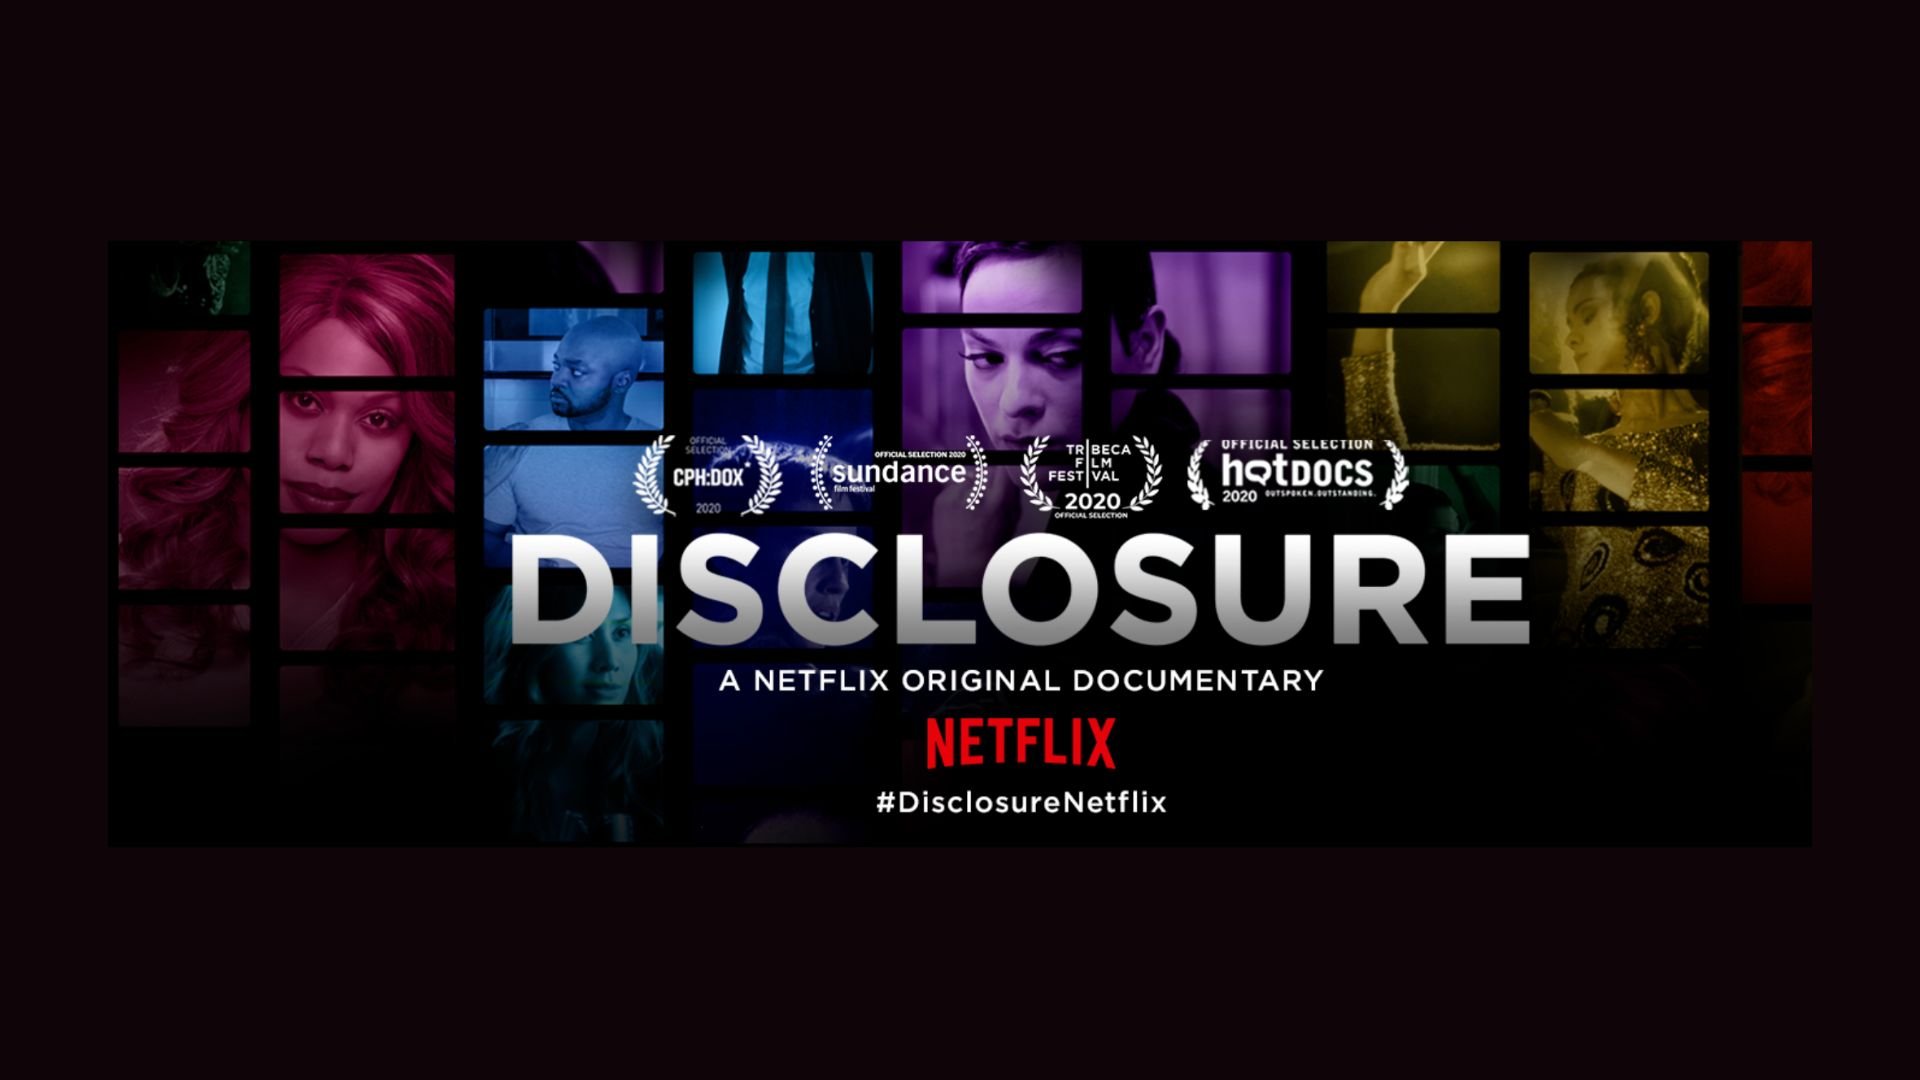   DISCLOSURE  takes a look at transgender depictions in film and television, revealing how Hollywood simultaneously reflects and manufactures our deepest anxieties about gender.   Learn more   